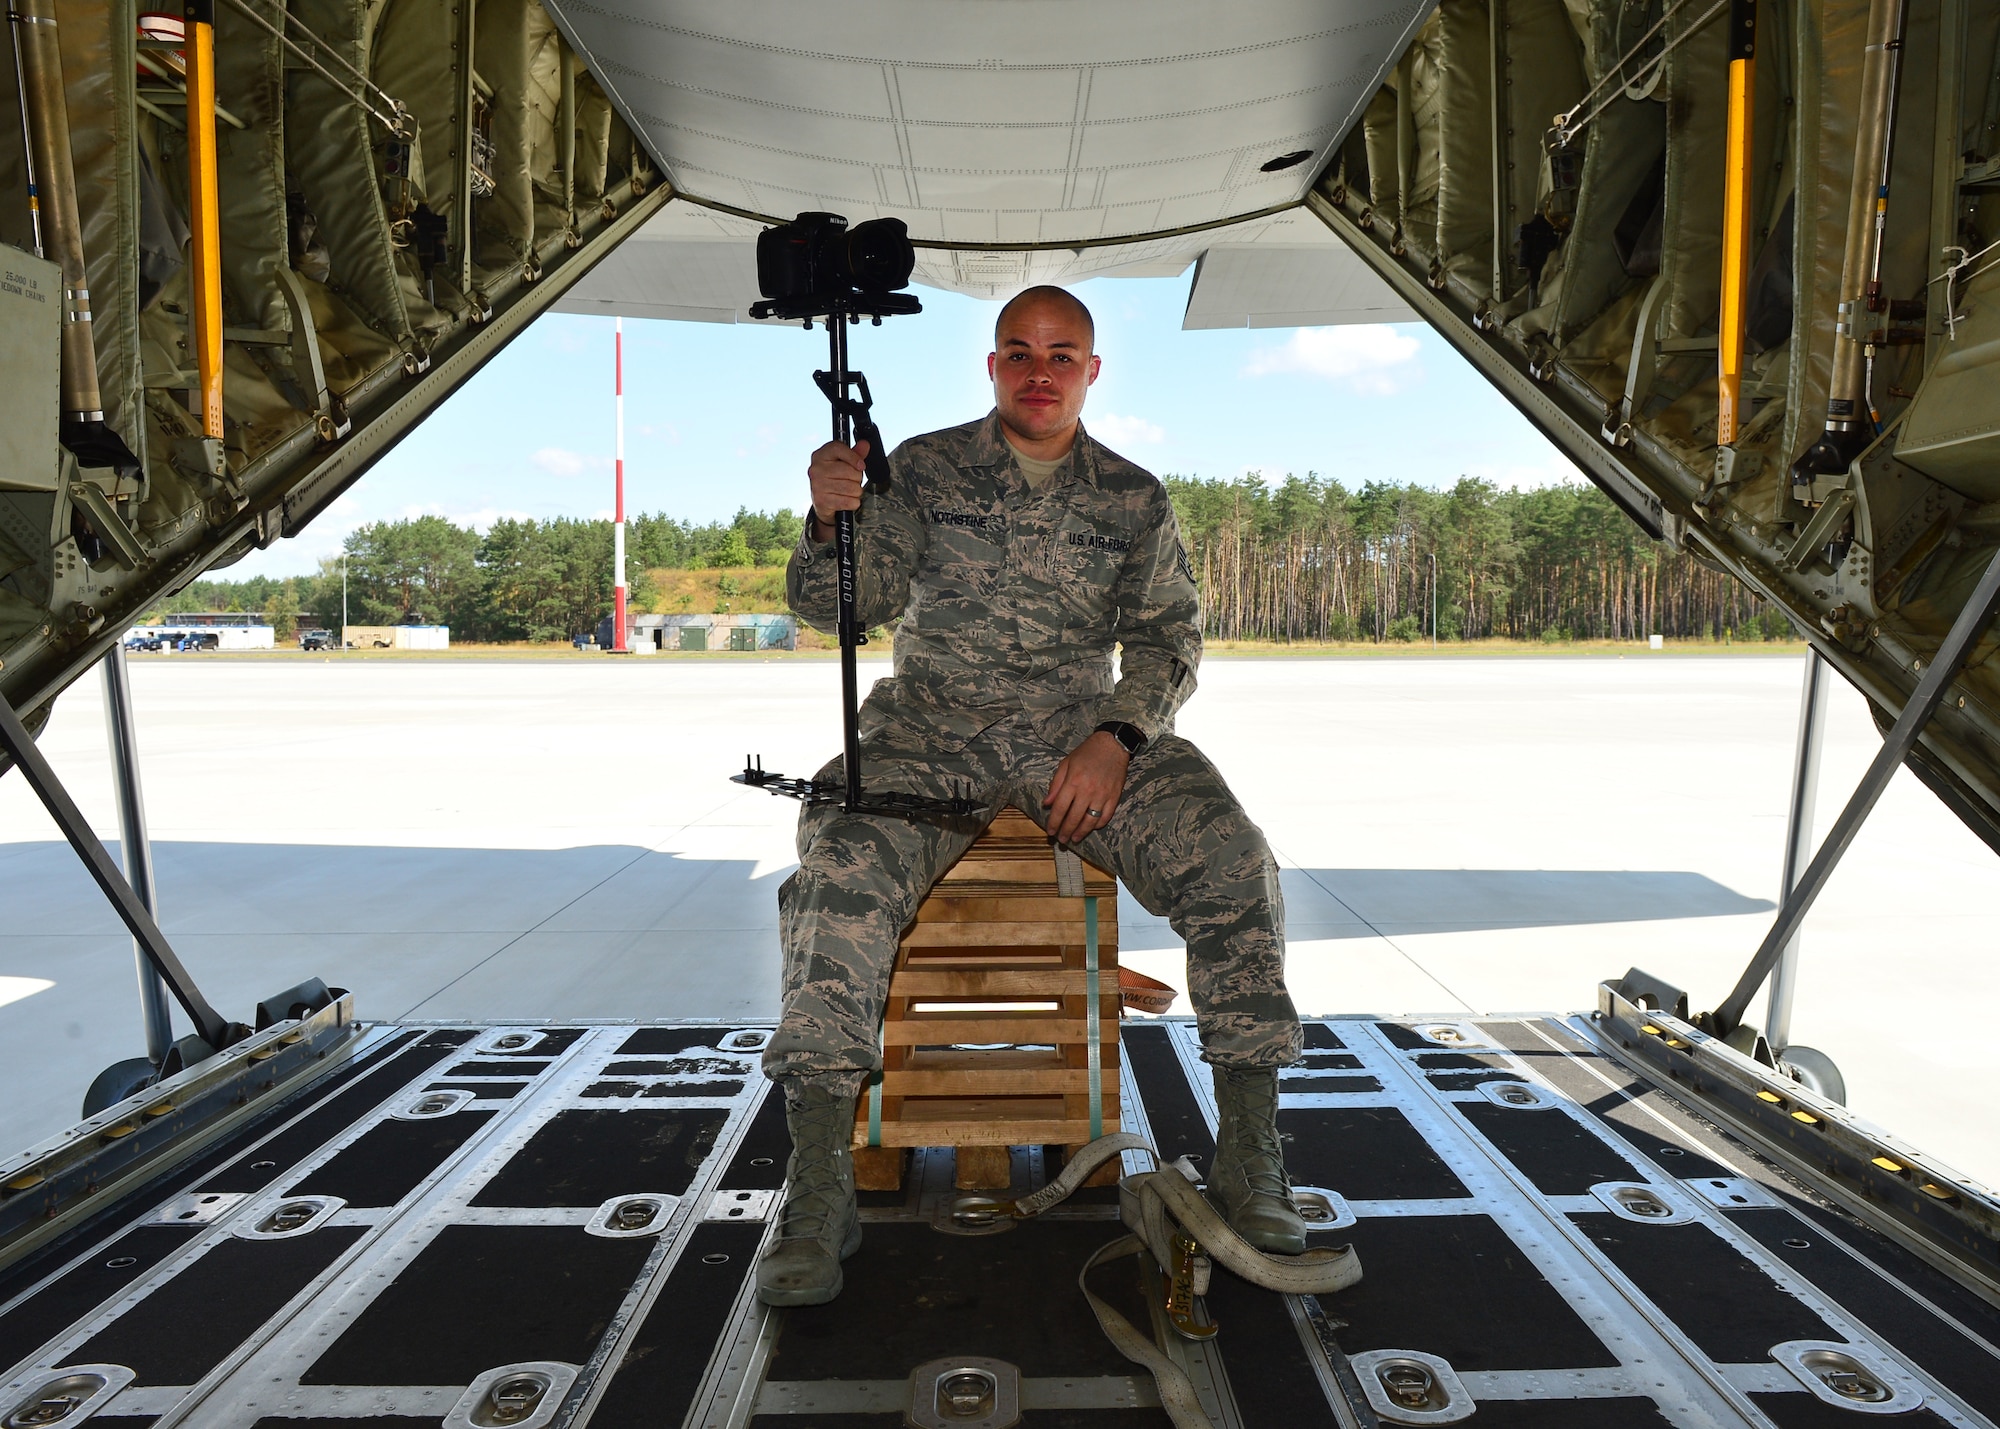 U.S. Air Force Staff Sgt. Devin Nothstine, 86th Airlift Wing Public Affairs broadcast journalist, shows off his equipment prior to takeoff from Powidz Air Base, Poland, July 11, 2019. As a member of public affairs and a broadcaster, Nothstine was responsible for documenting operations, creating and distributing videos, and working with media outlets to highlight U.S. and Polish efforts during Aviation Rotation 19-3. (U.S. Air Force photo by Staff Sgt. Jimmie D. Pike)